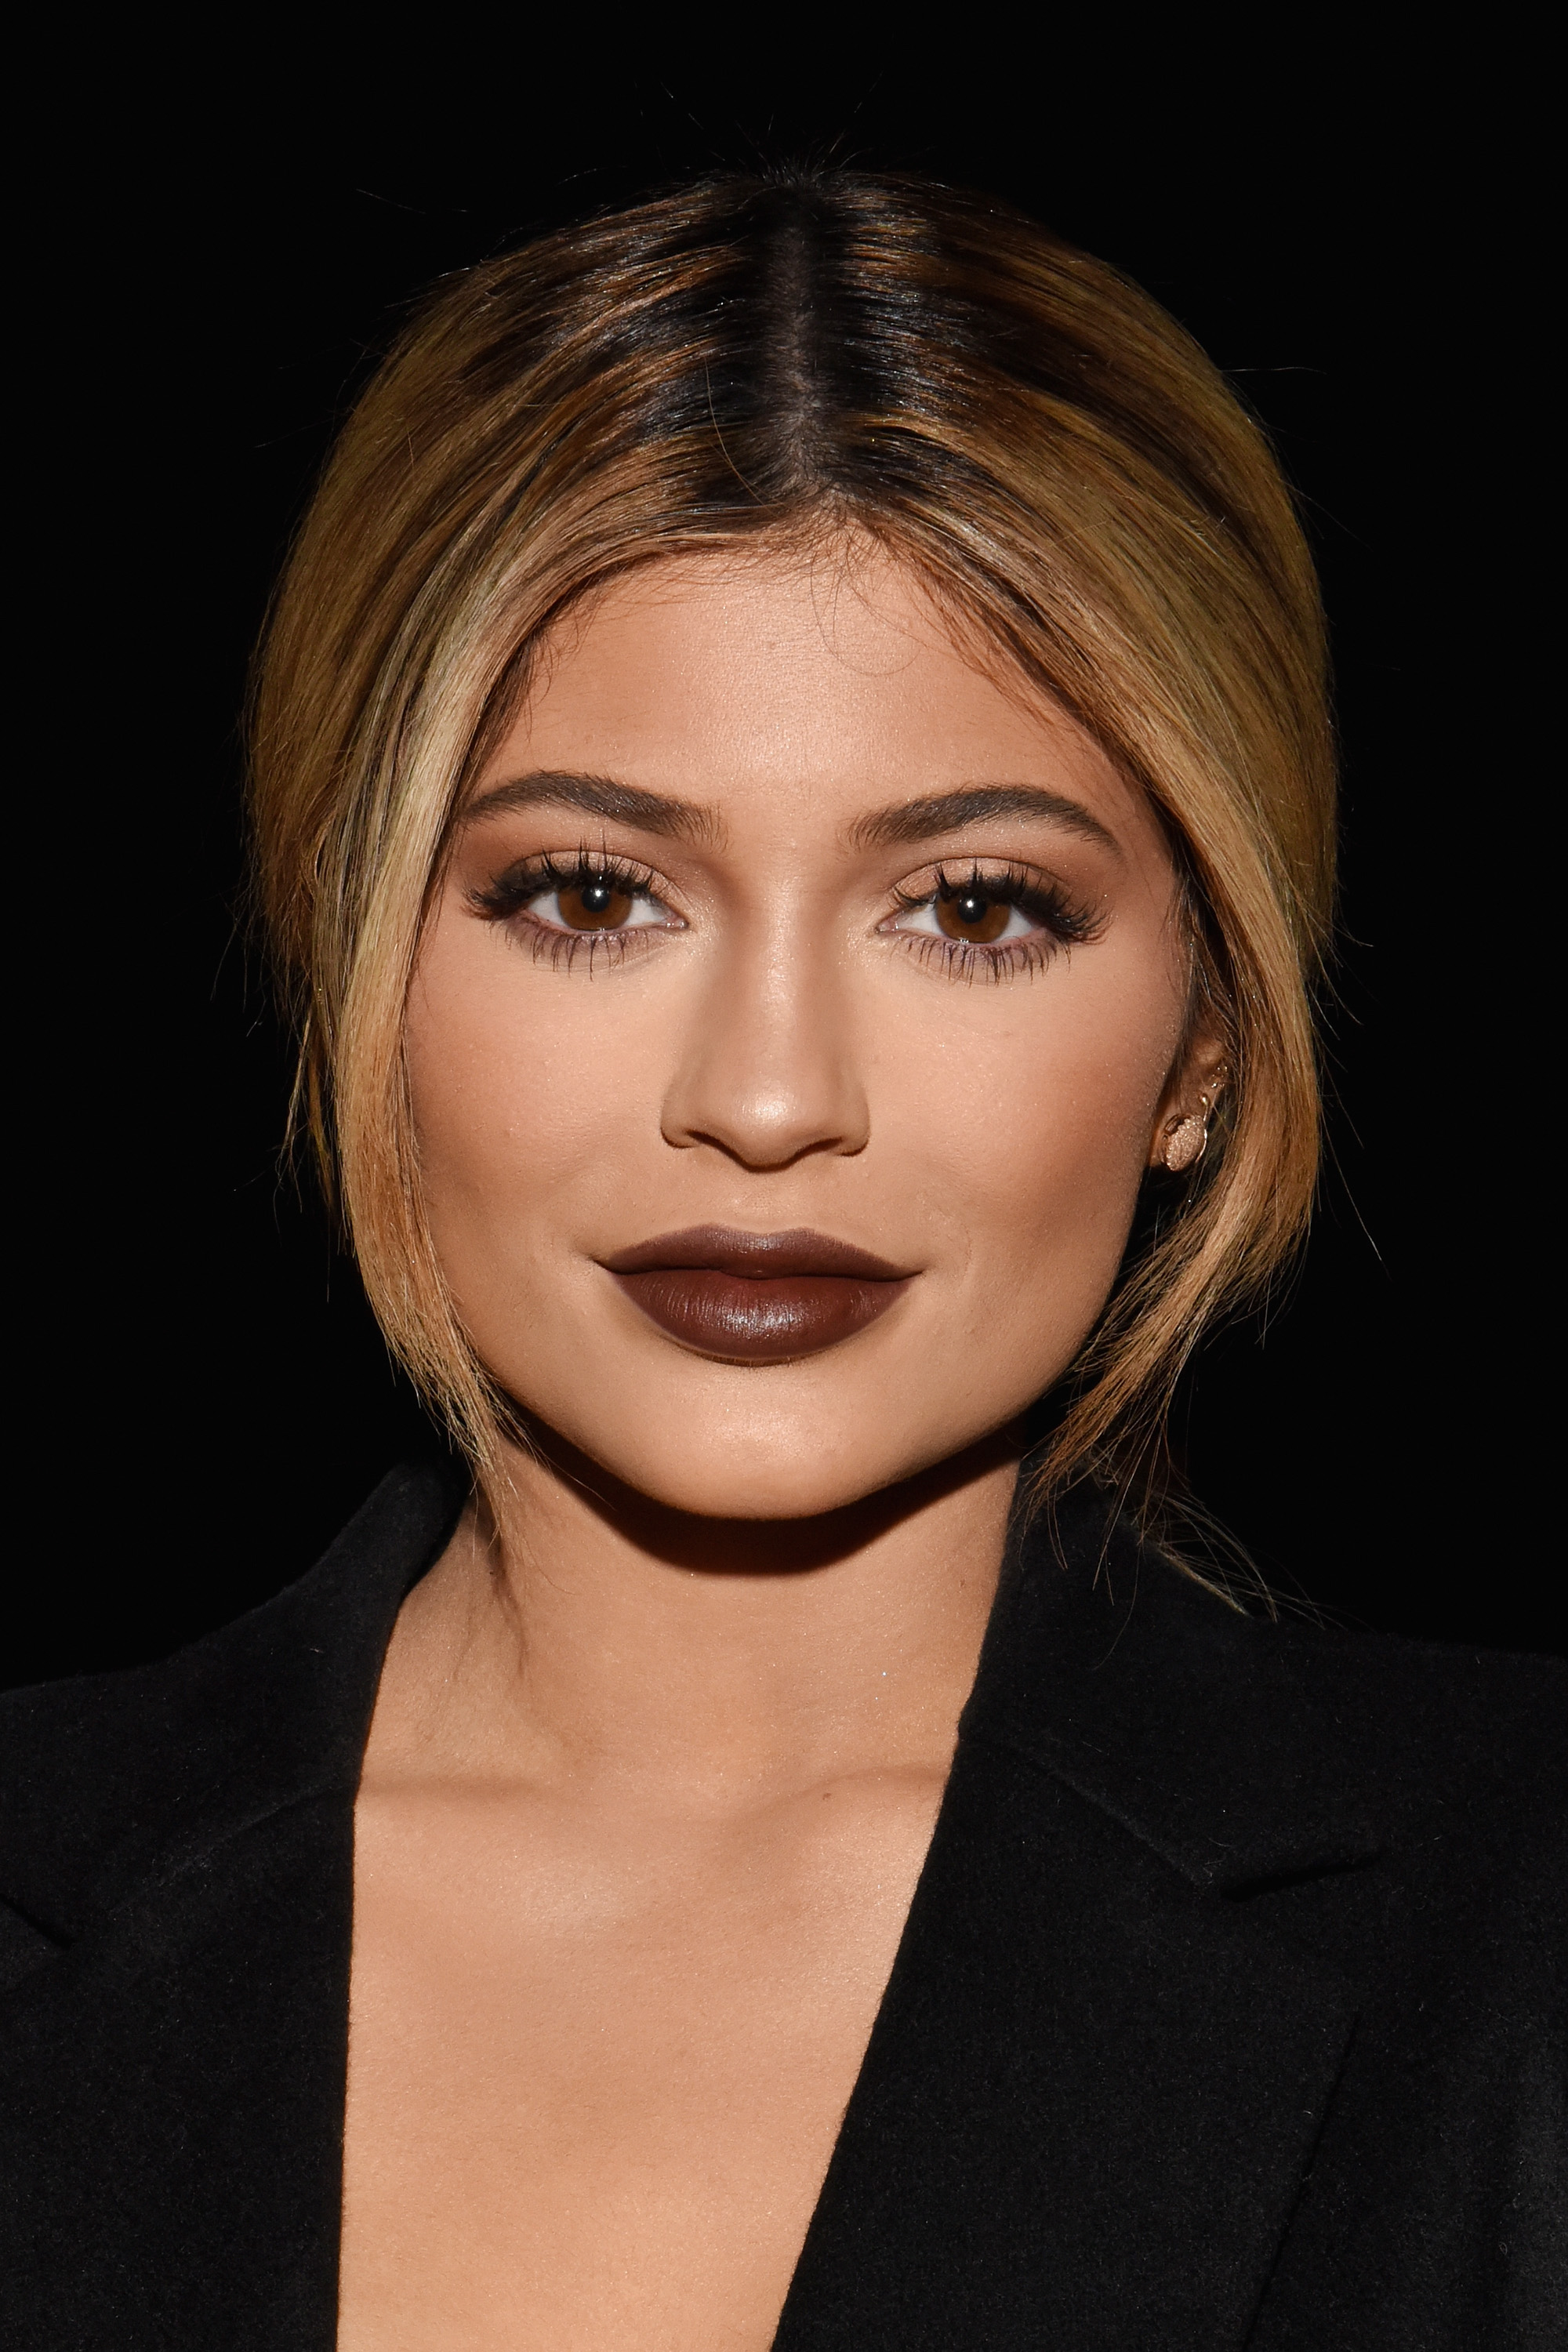 Kylie Jenner Has Short Hair Again With This New Blunt Bob Cut PHOTO